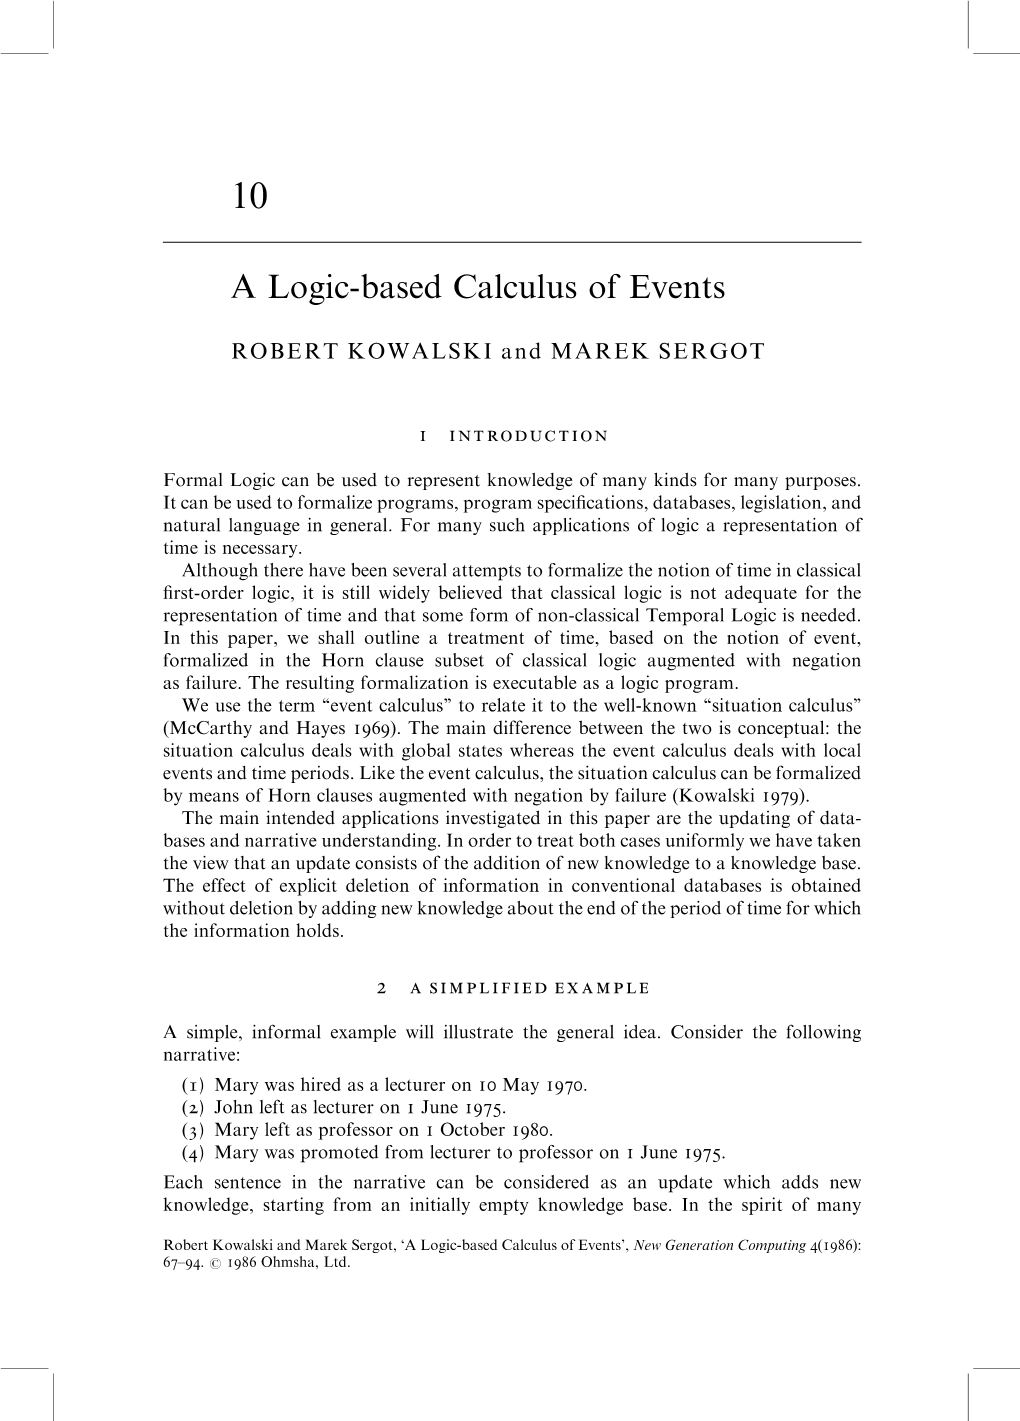 A Logic-Based Calculus of Events